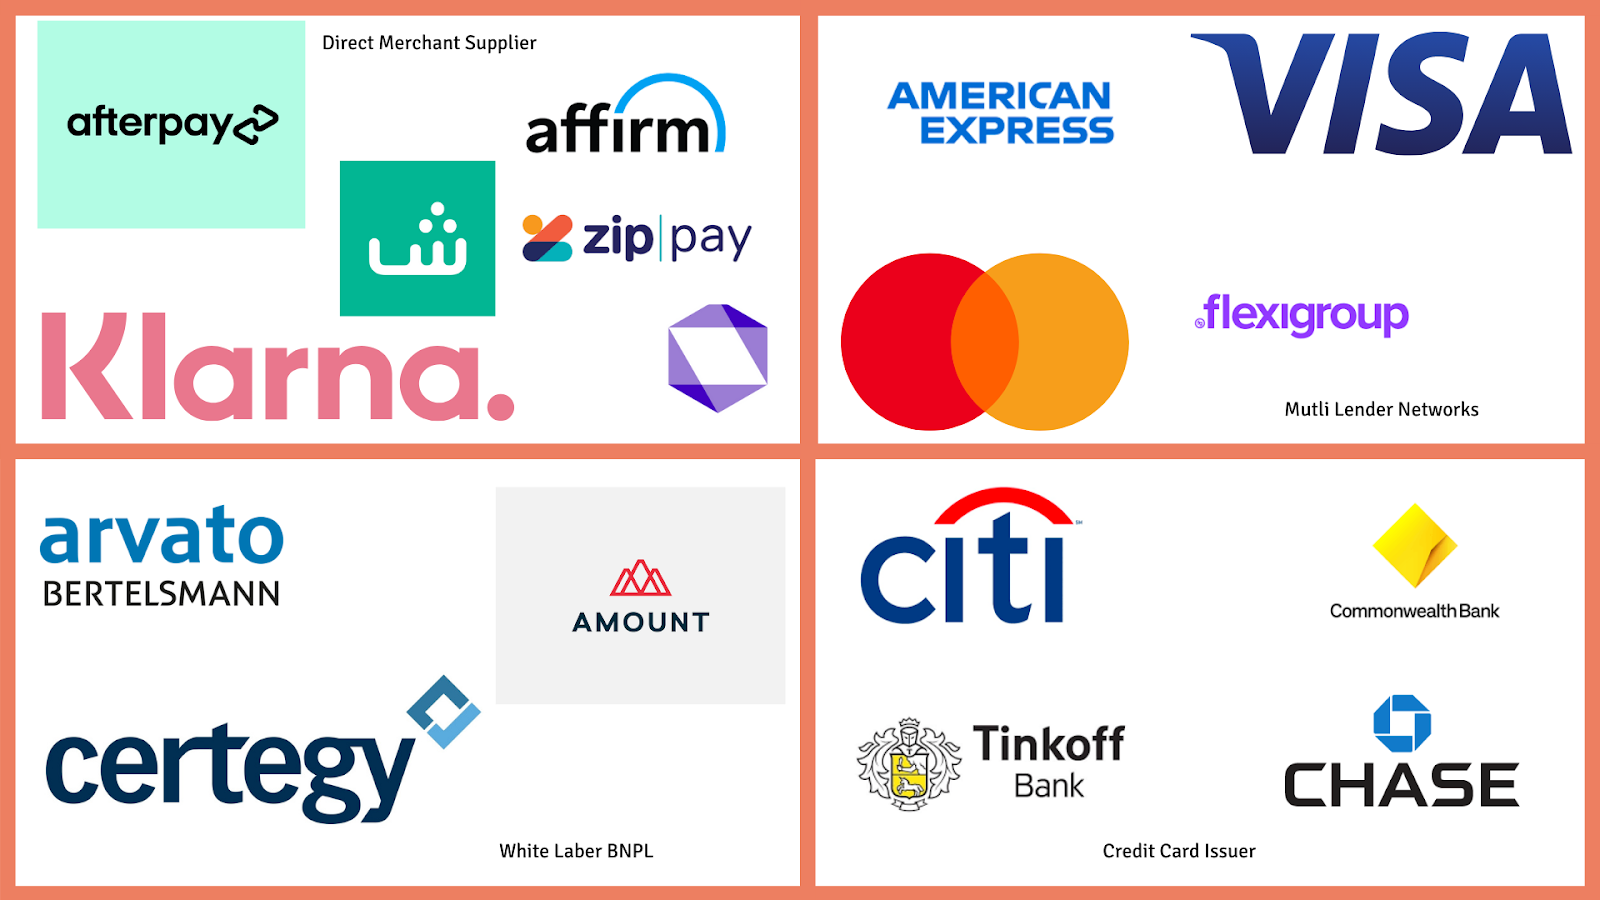 An alternative to credit cards? Afterpay off to strong start in US market 